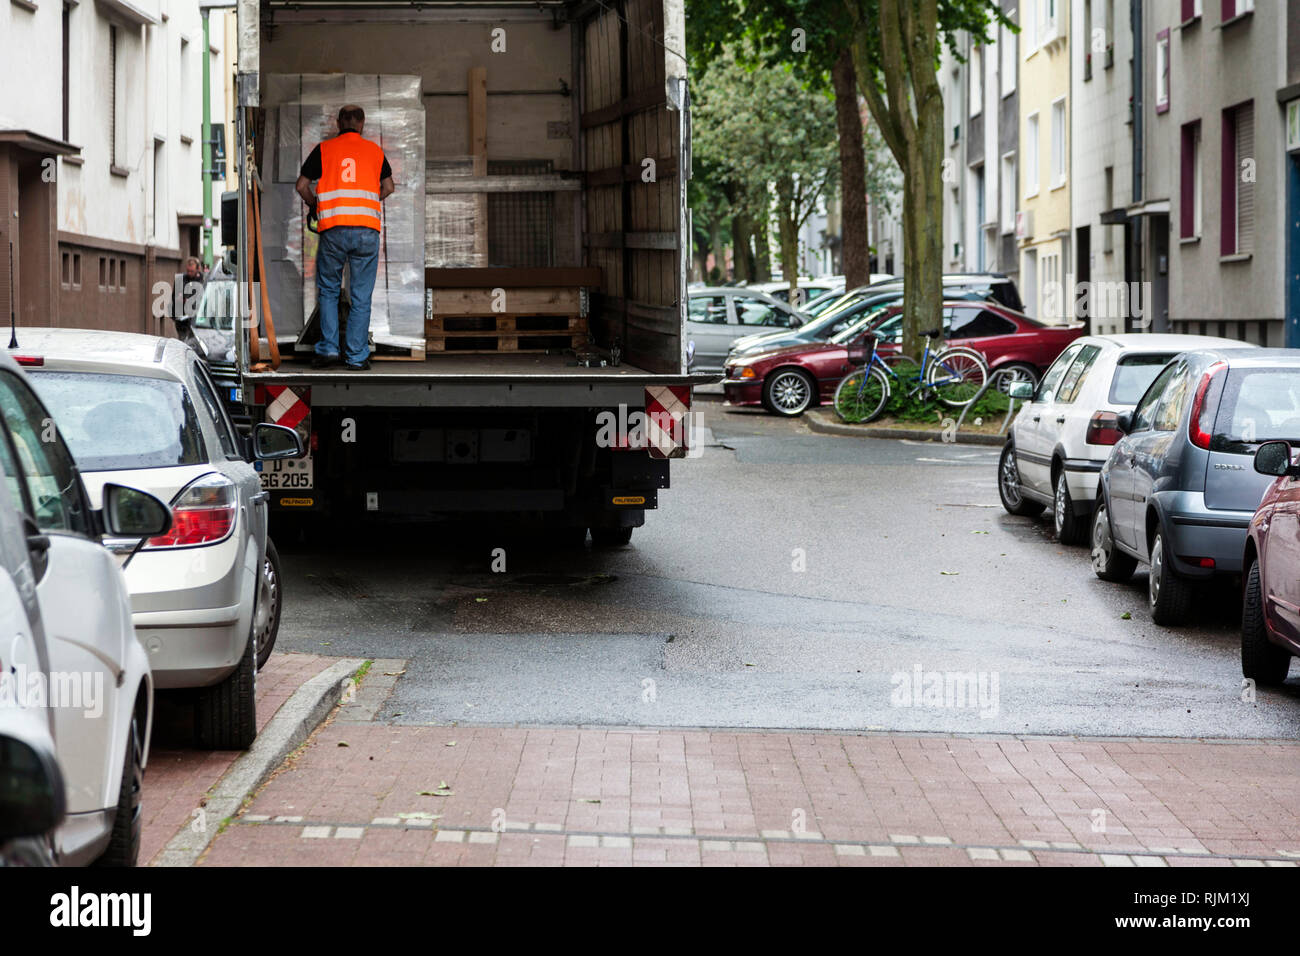 Motorist loading and unloading in a residential area Stock Photo